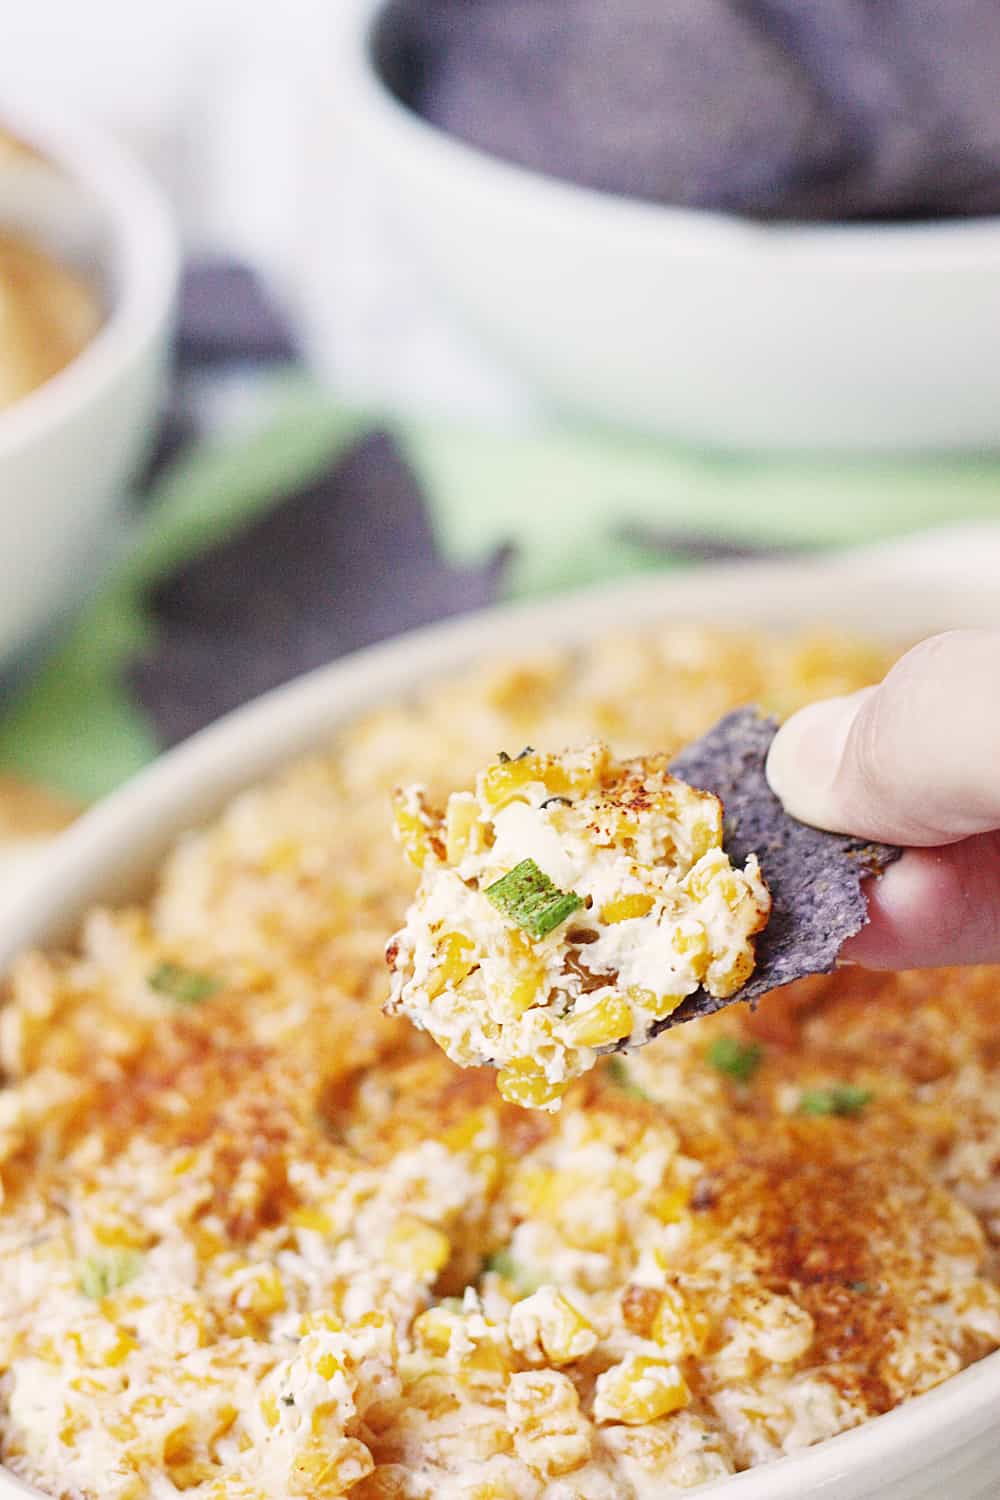 Easy Hot Corn Dip -- This hot corn dip recipe is rich, creamy, and full of flavor. It also comes together super quickly and is super delicious served with favorite crackers! #corndip #appetizer #hotappetizer #appetizerrecipe #halfscratched #corn #cornrecipe #holidayrecipe #cooking #recipe #easyrecipe